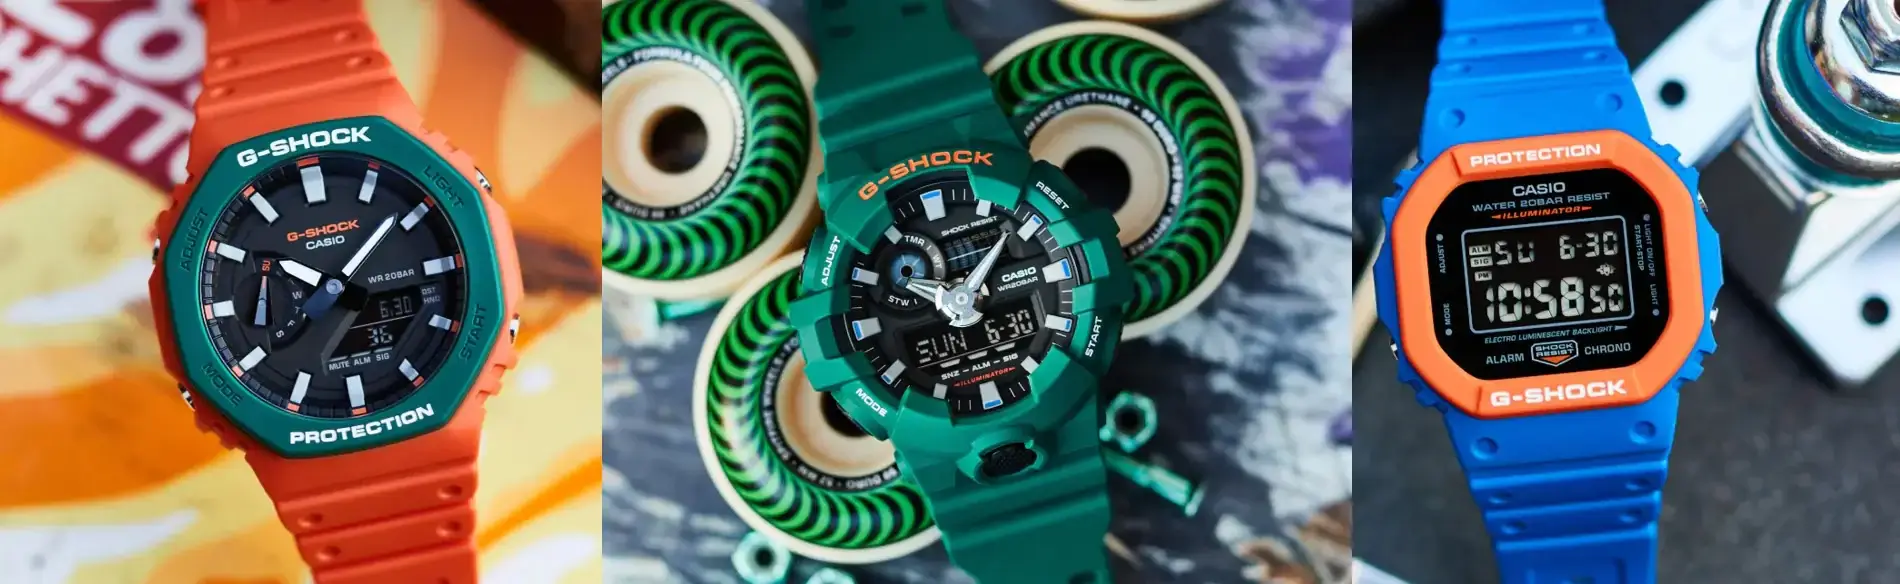 The New G-Shock Skater Flavour Series Hits The Half-Pipe